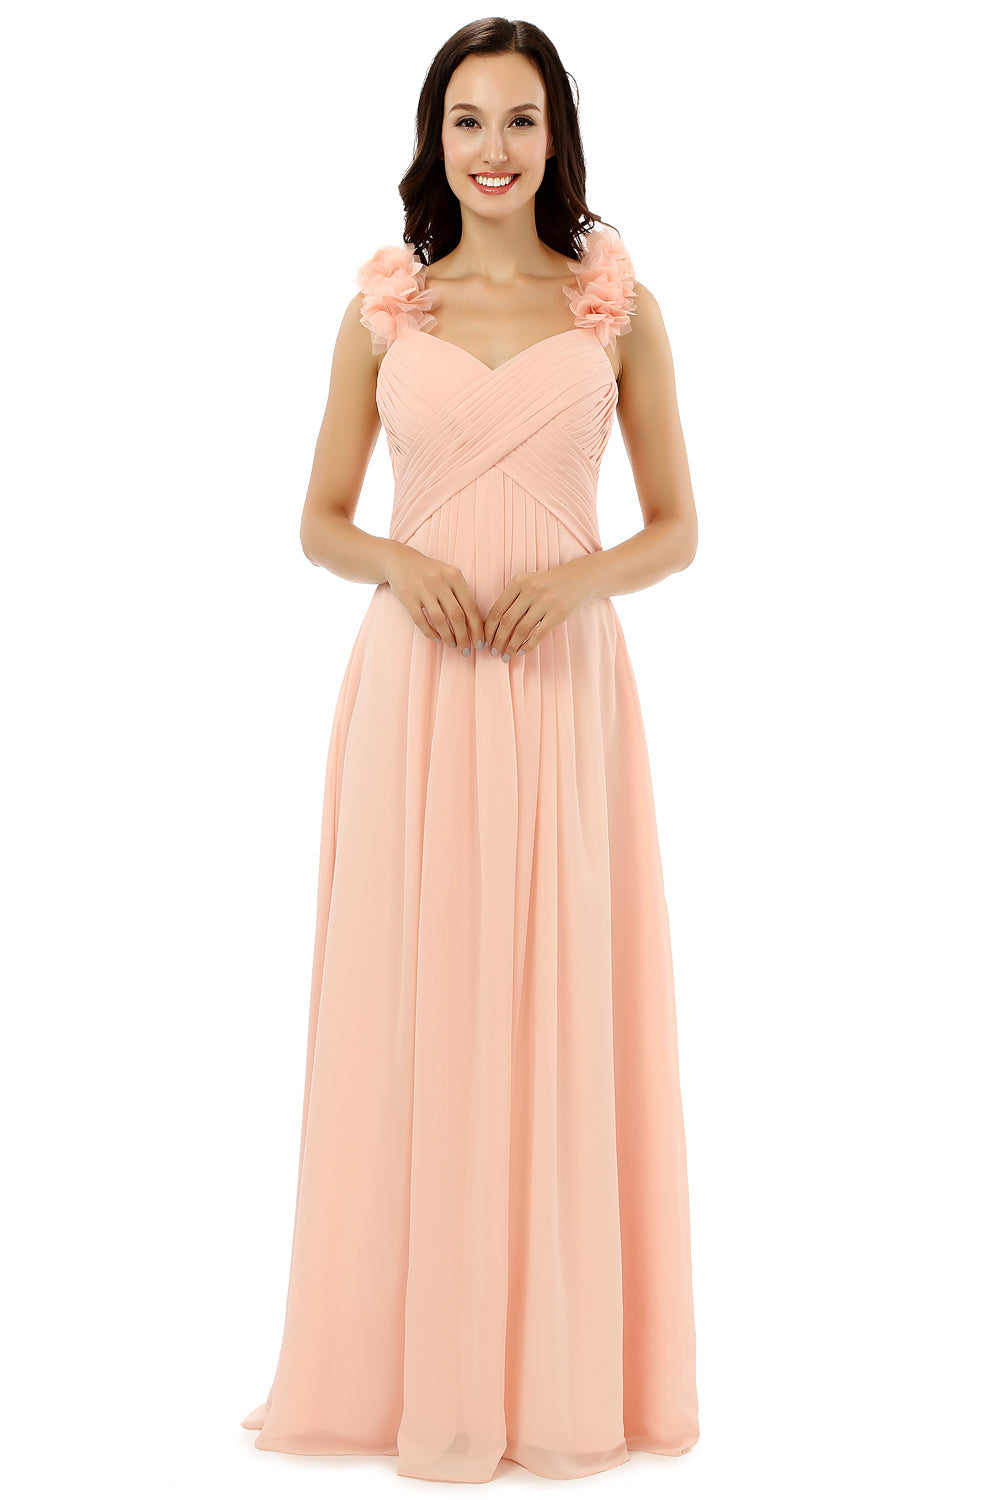 Party Dress Style, Pink Chiffon Halter Backless With Pleats Bridesmaid Dresses